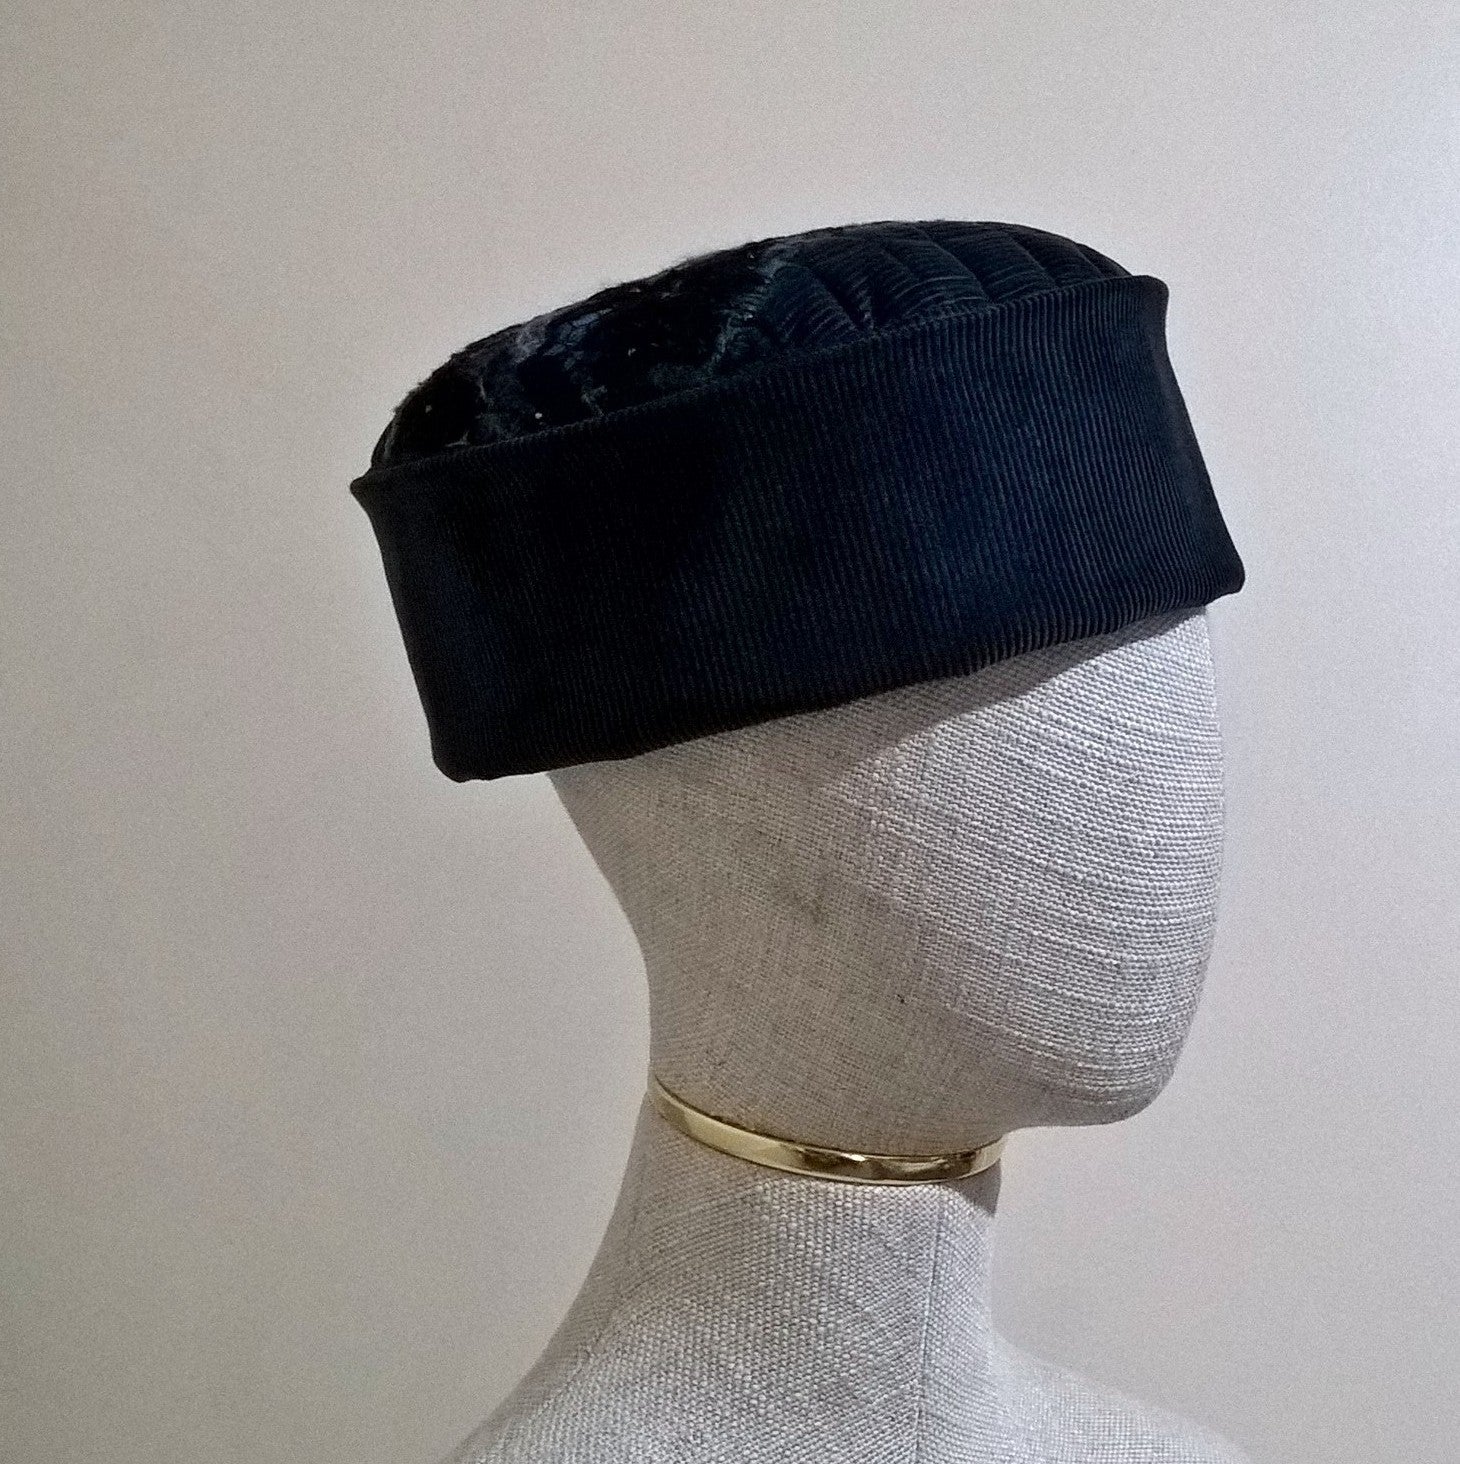 Brimless skull cap handmade in cyan blue corduroy and embellished with nuno felting